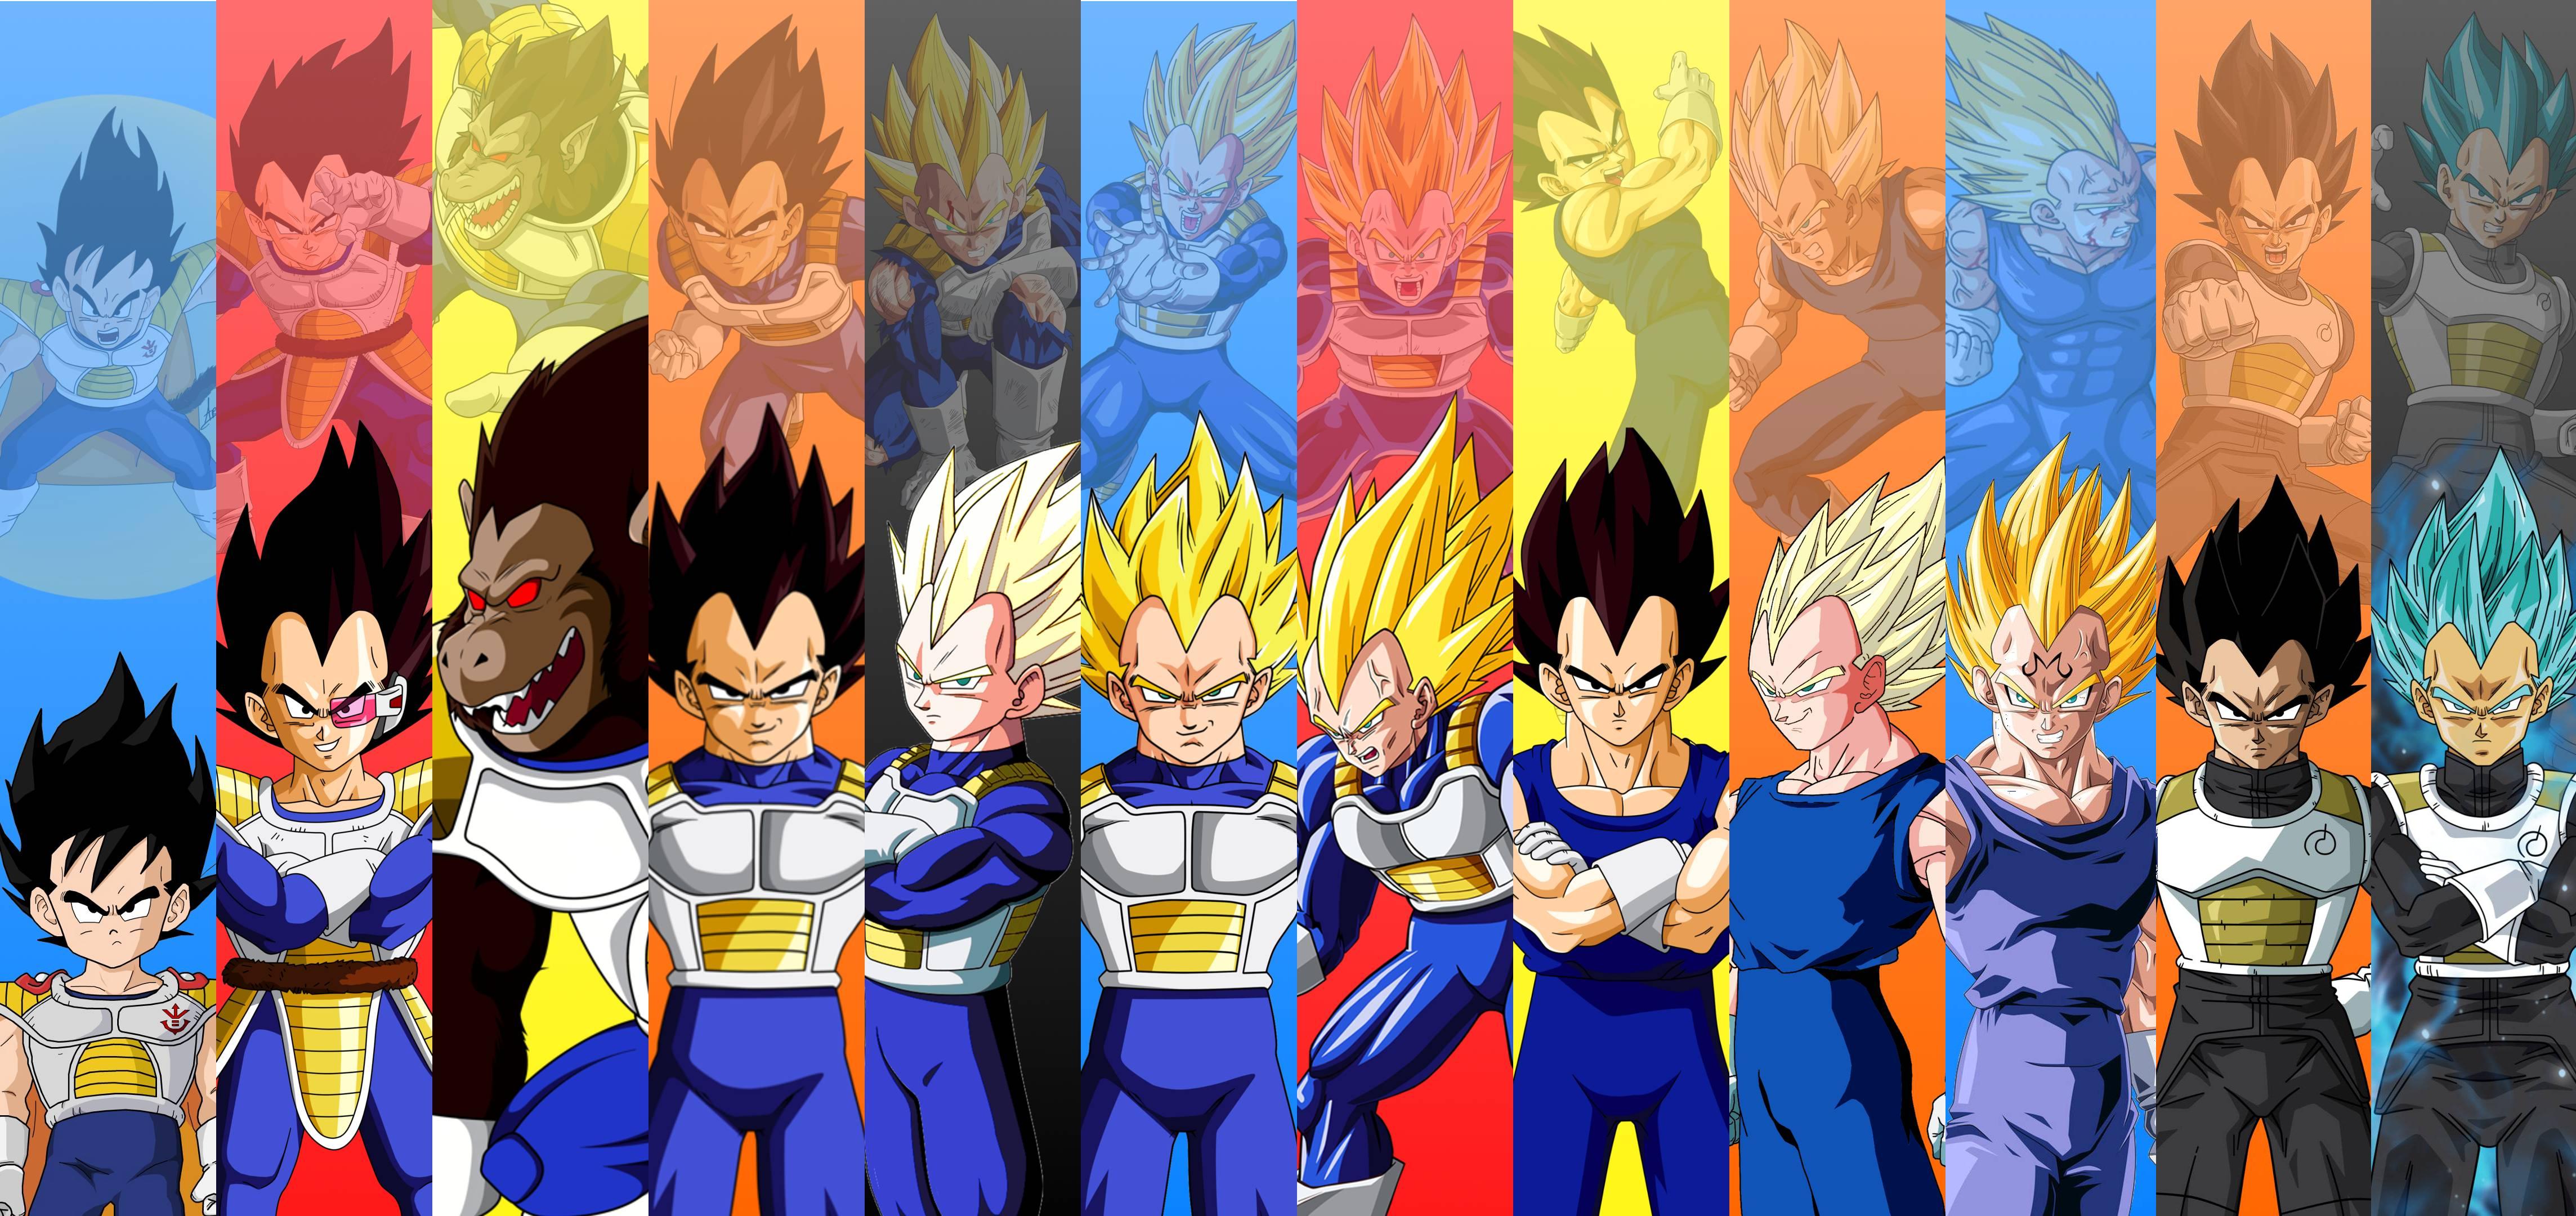 Finished a 4K image that features 45 DBZ Villians and Forms [Raditz to Kid Buu] [17277x2160]. See Comments for More!